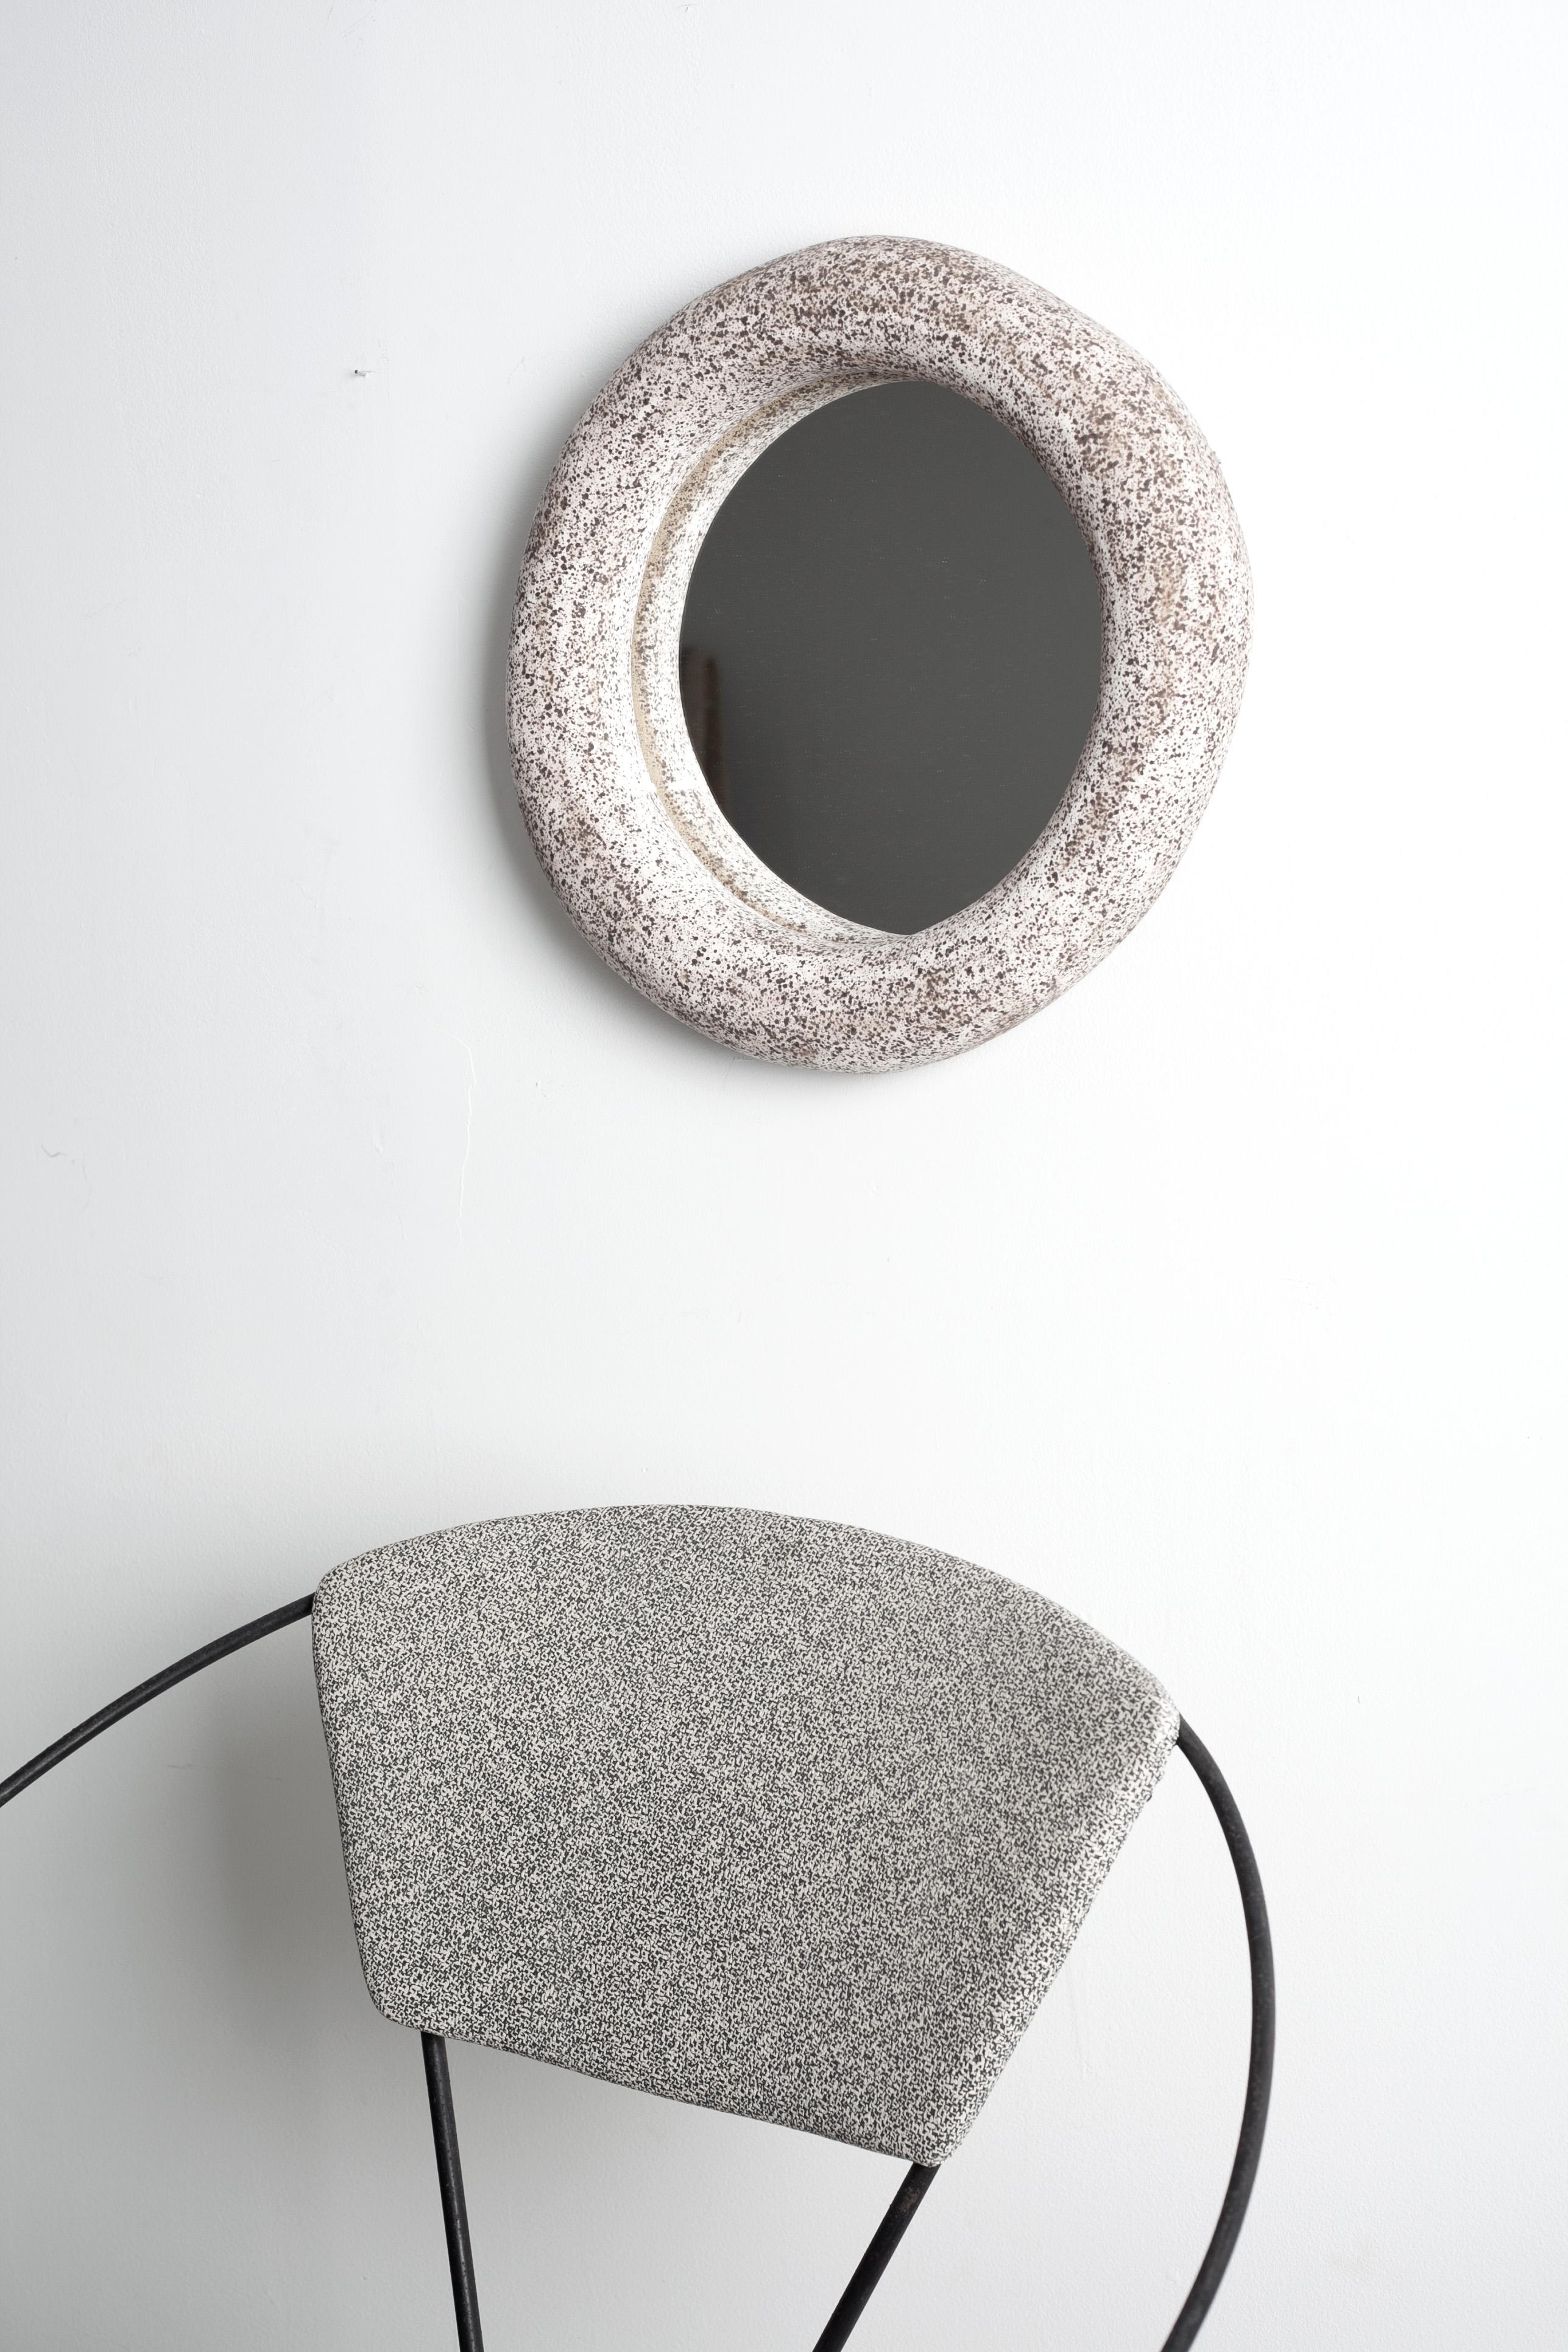 One of a kind ceramic mirror, unique and hand built. The mirror frame is comprised of speckled stoneware clay with matte white glaze. 
Diameter measures 15” and is about 4” deep. The back has two 3/4” holes for easy hanging and is finished with soft